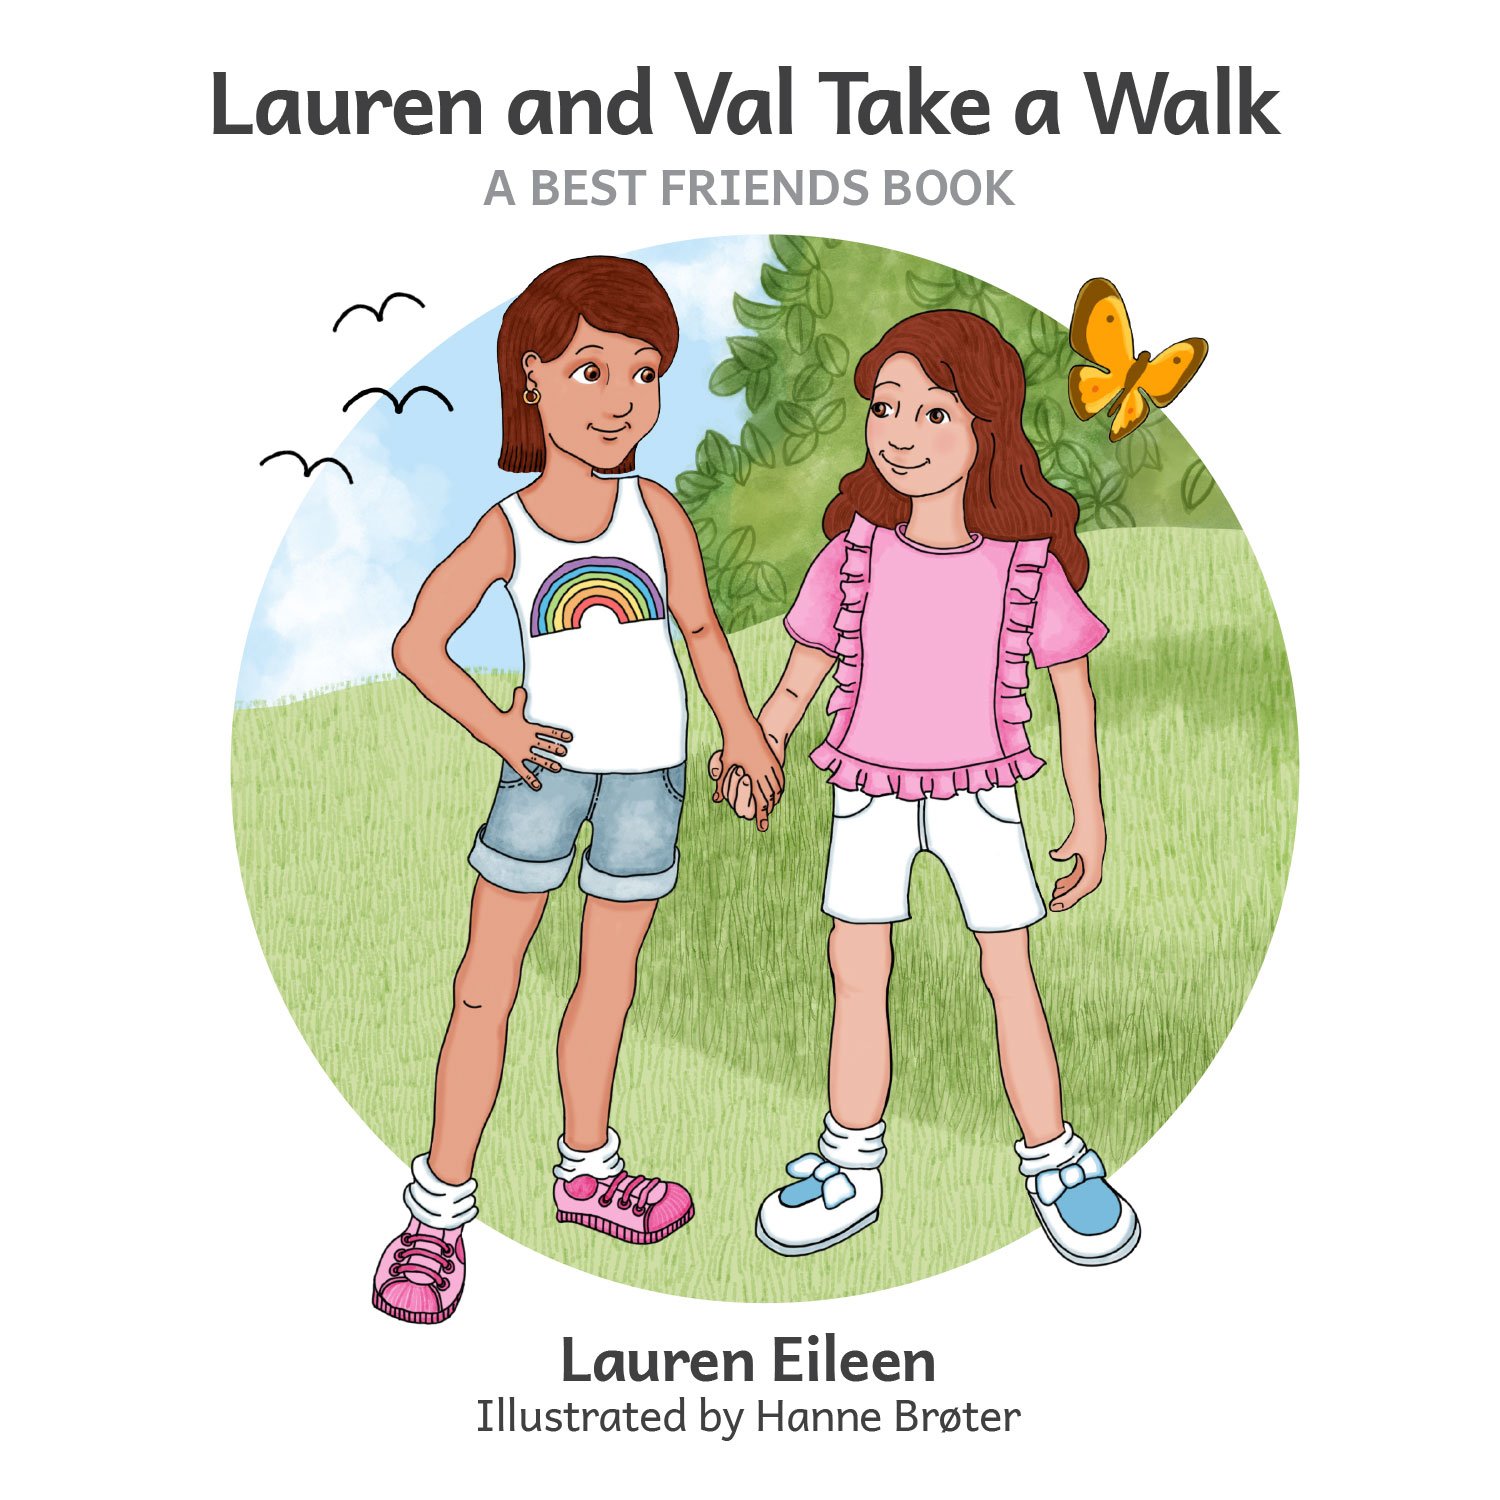 Lauren and Val take a walk